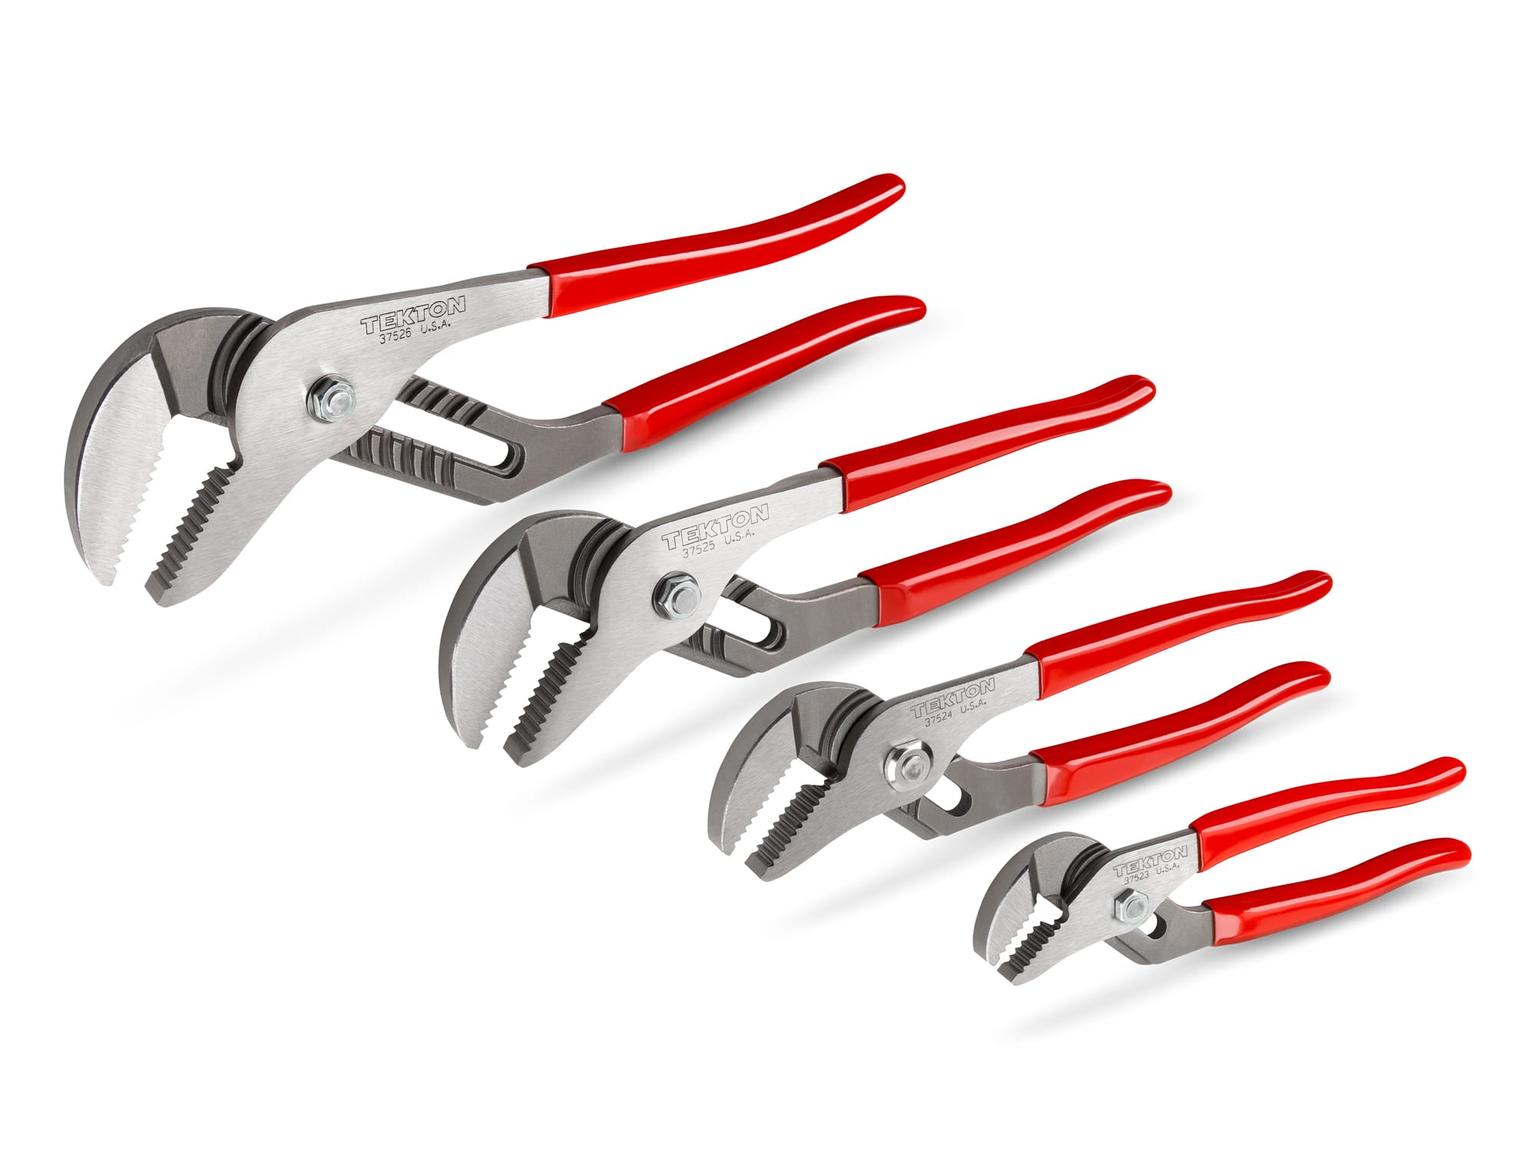 TEKTON 90395-T Groove Joint Pliers Set, 4-Piece (7, 10, 13, 16 in.)